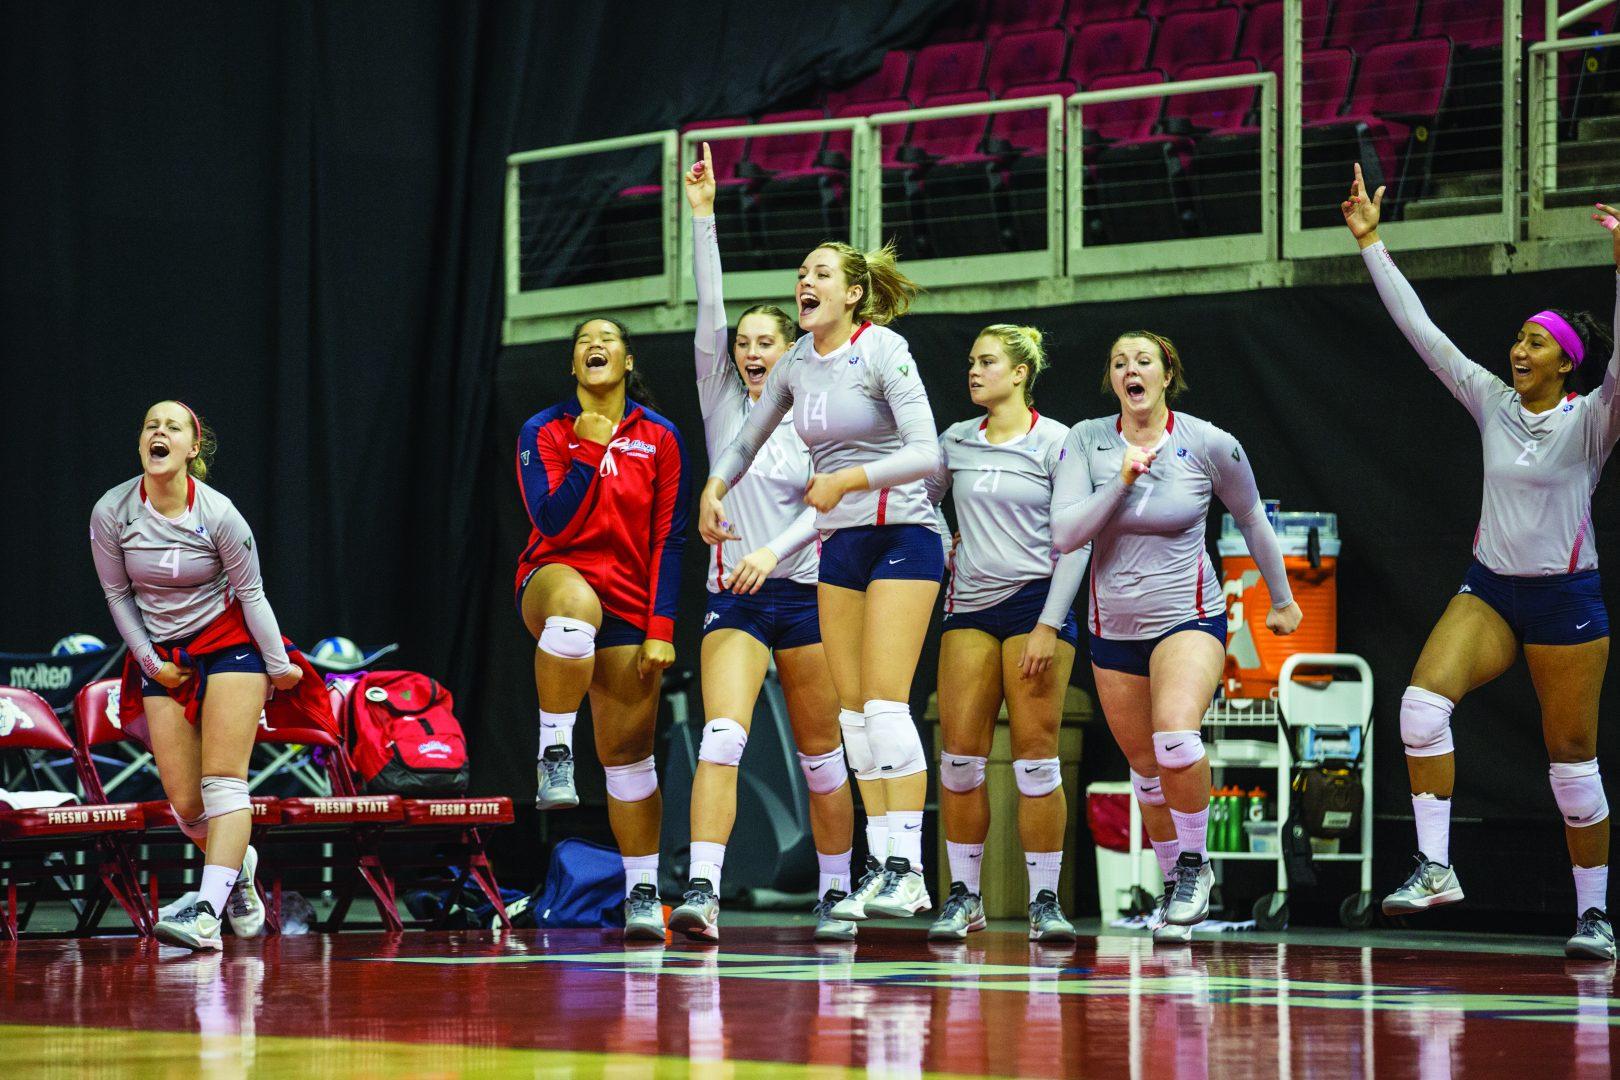 The Fresno State volleyball team celebrates getting their first conference win of the season defeating New Mexico 3-0 on Saturday afternoon at the Save Mart Center. (Khone Saysamongdy/The Collegian)